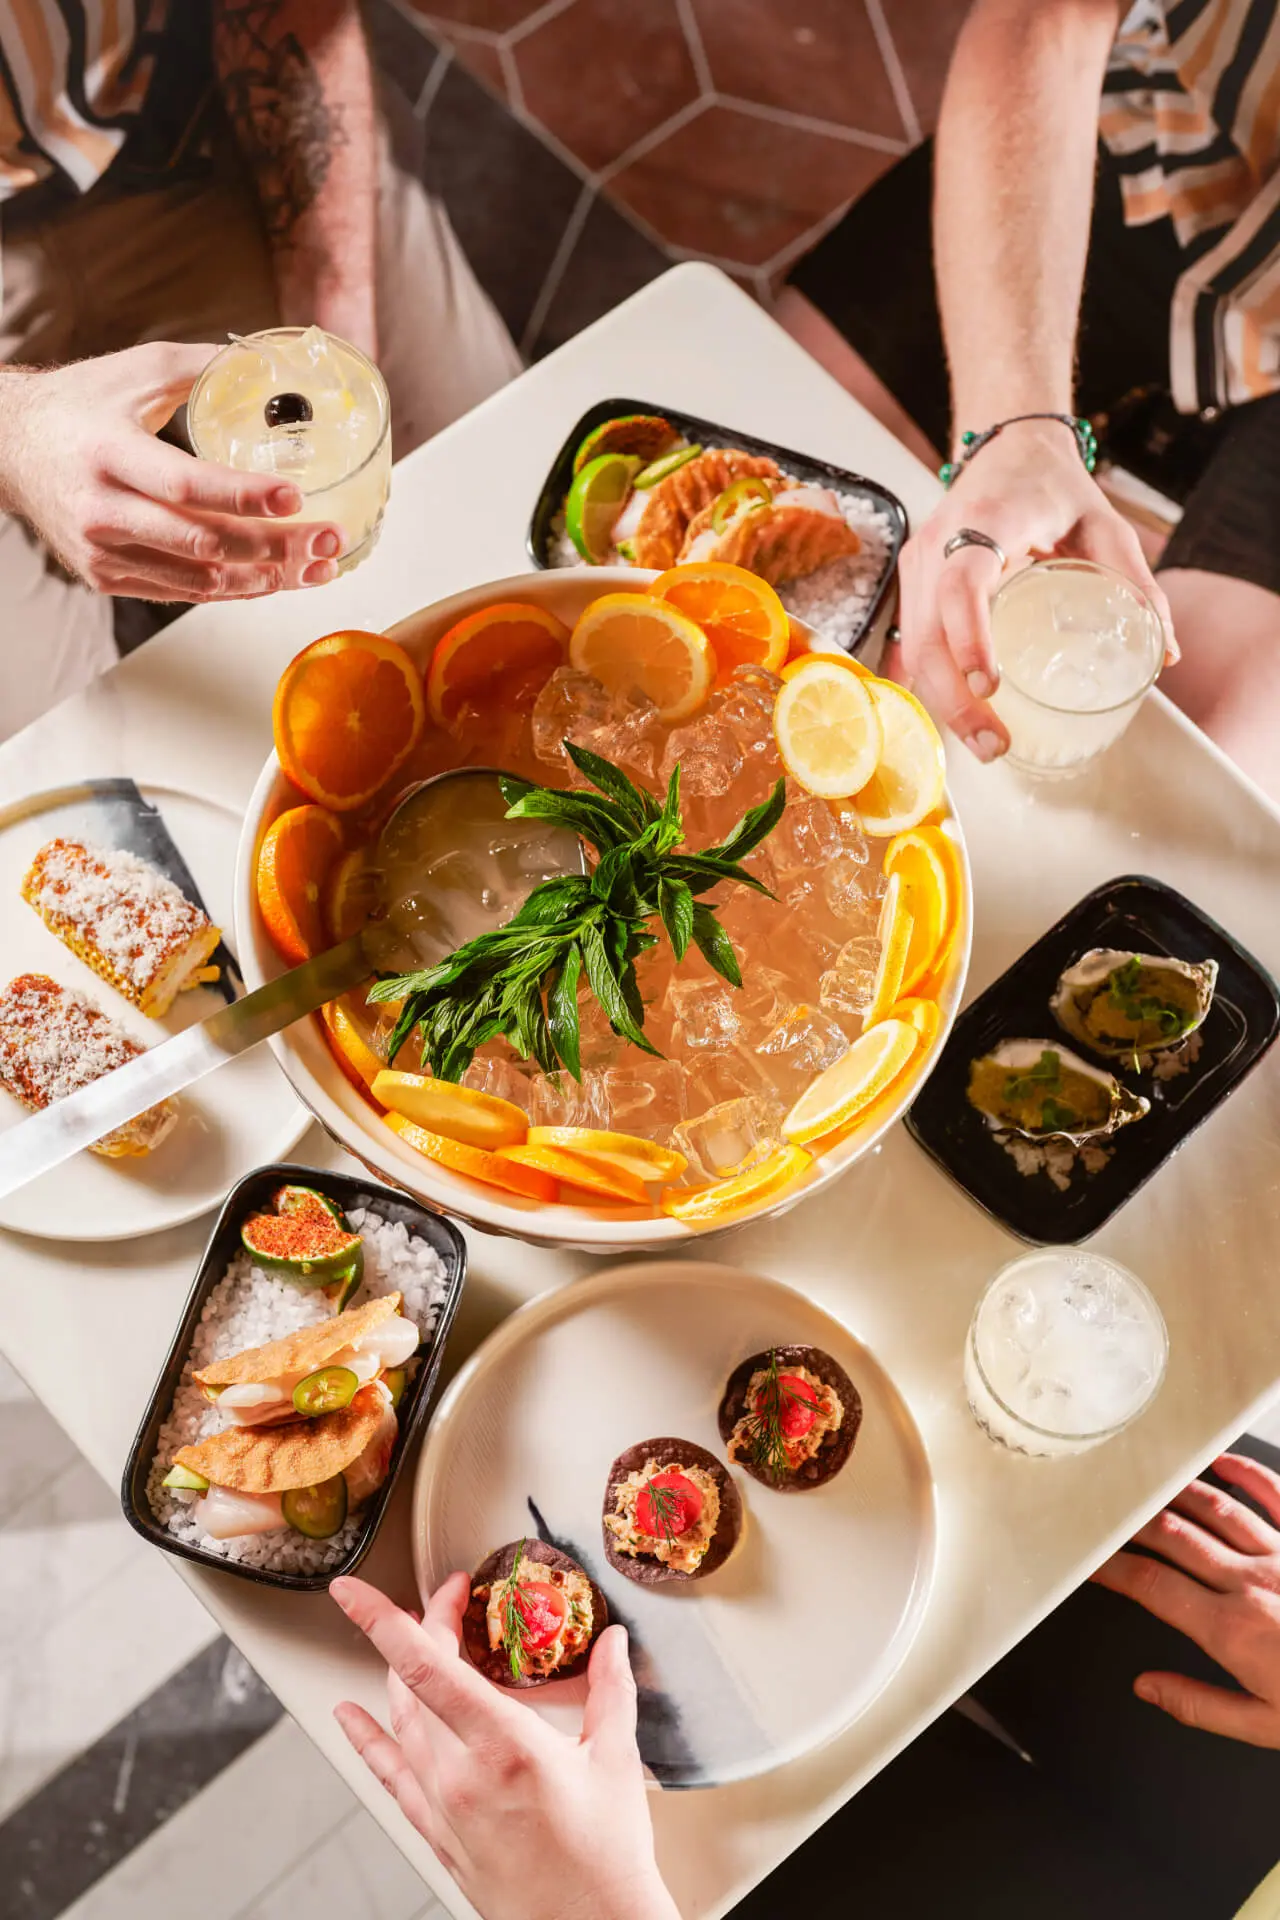 Punch bowl on table with food